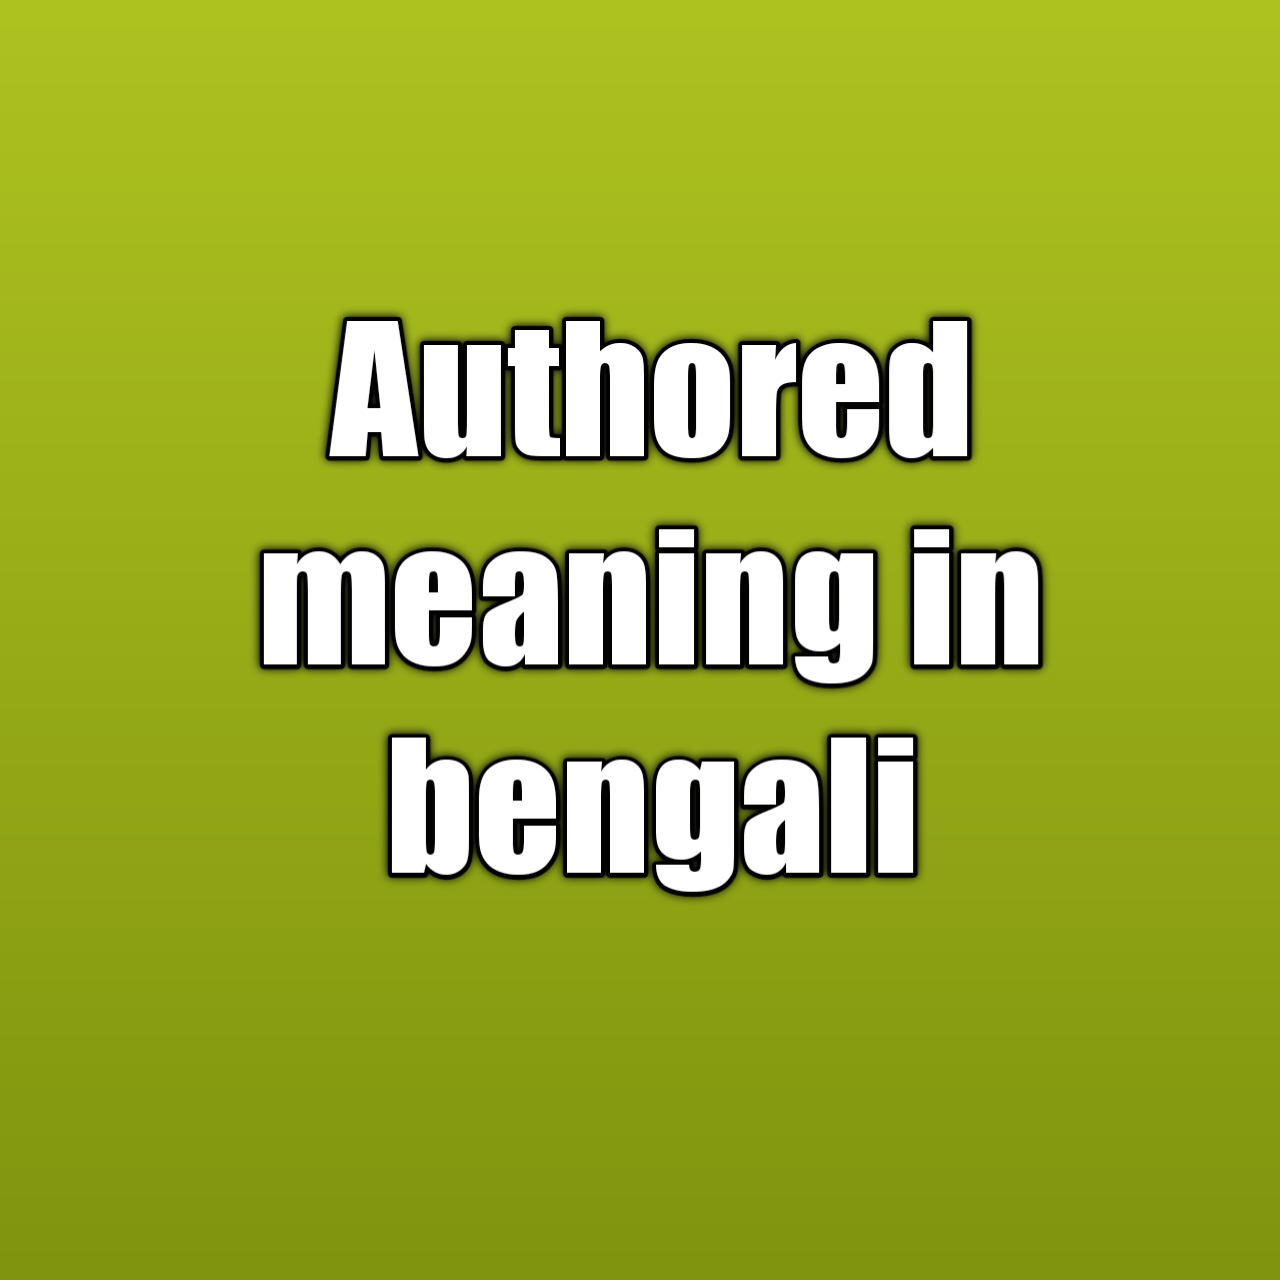 authored meaning in bengali, authored meaning